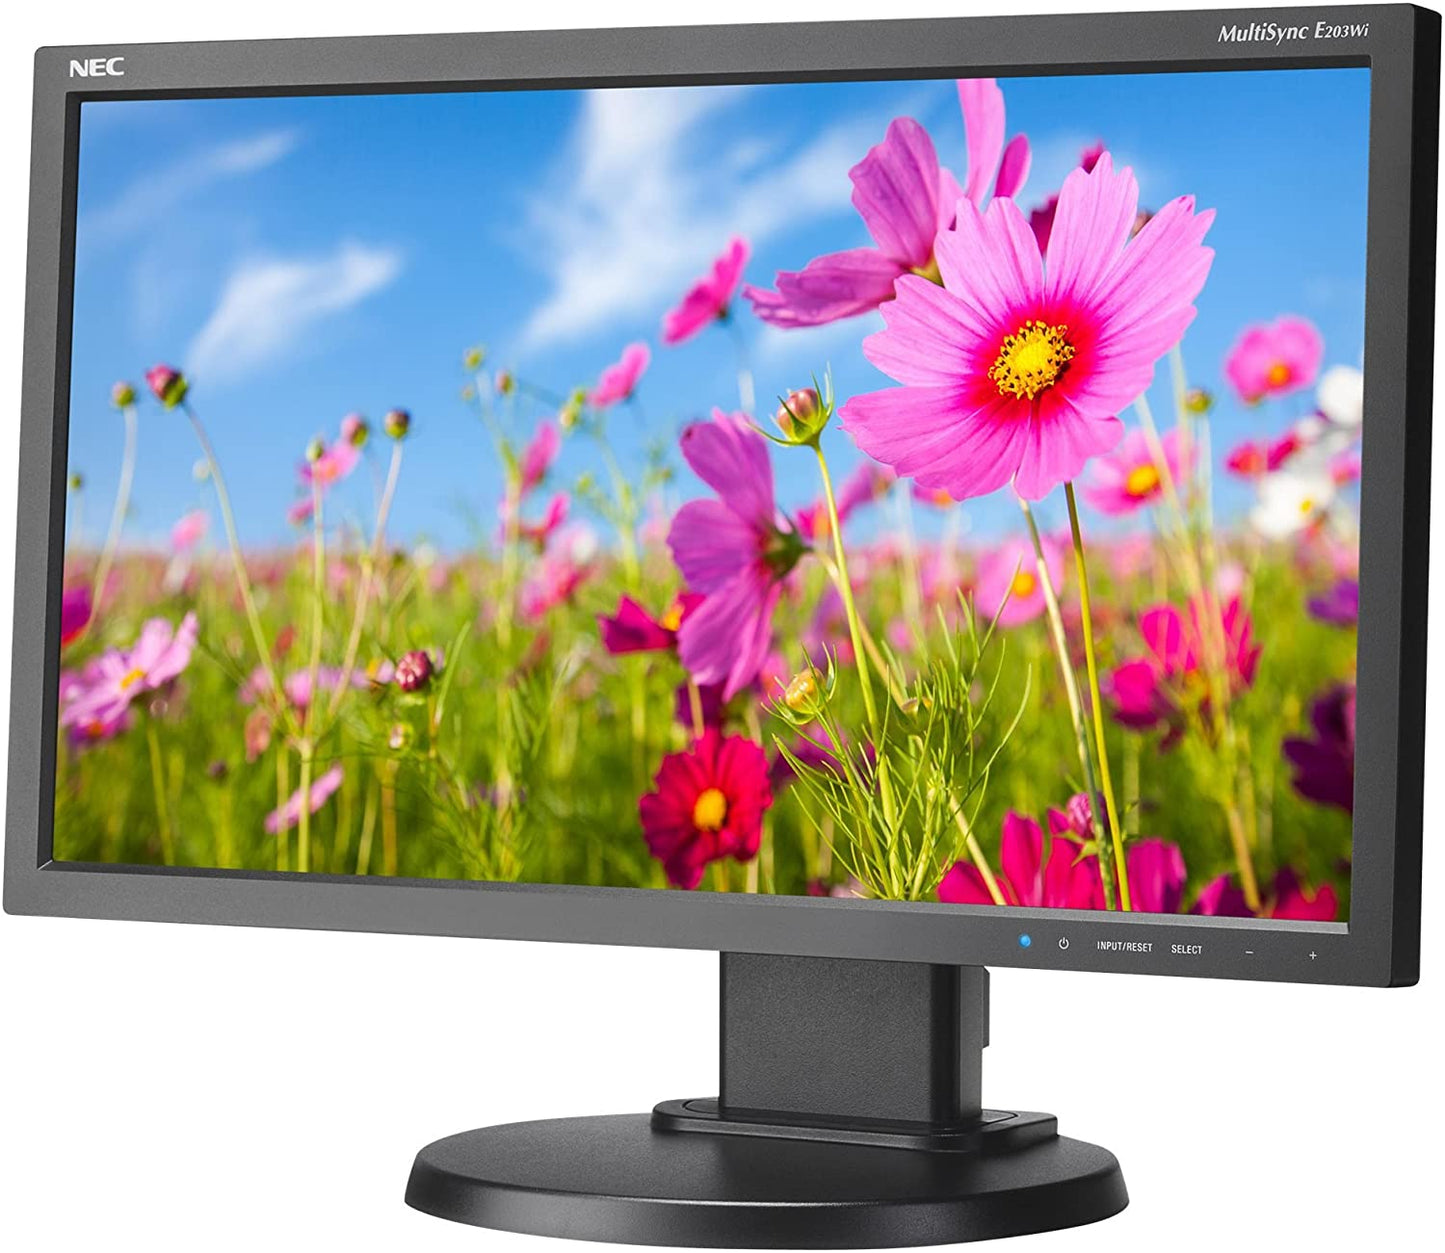 MONITOR, 22" LCD LED ECO-FRIENDLY W/IPS PANEL Information Technology DEX 